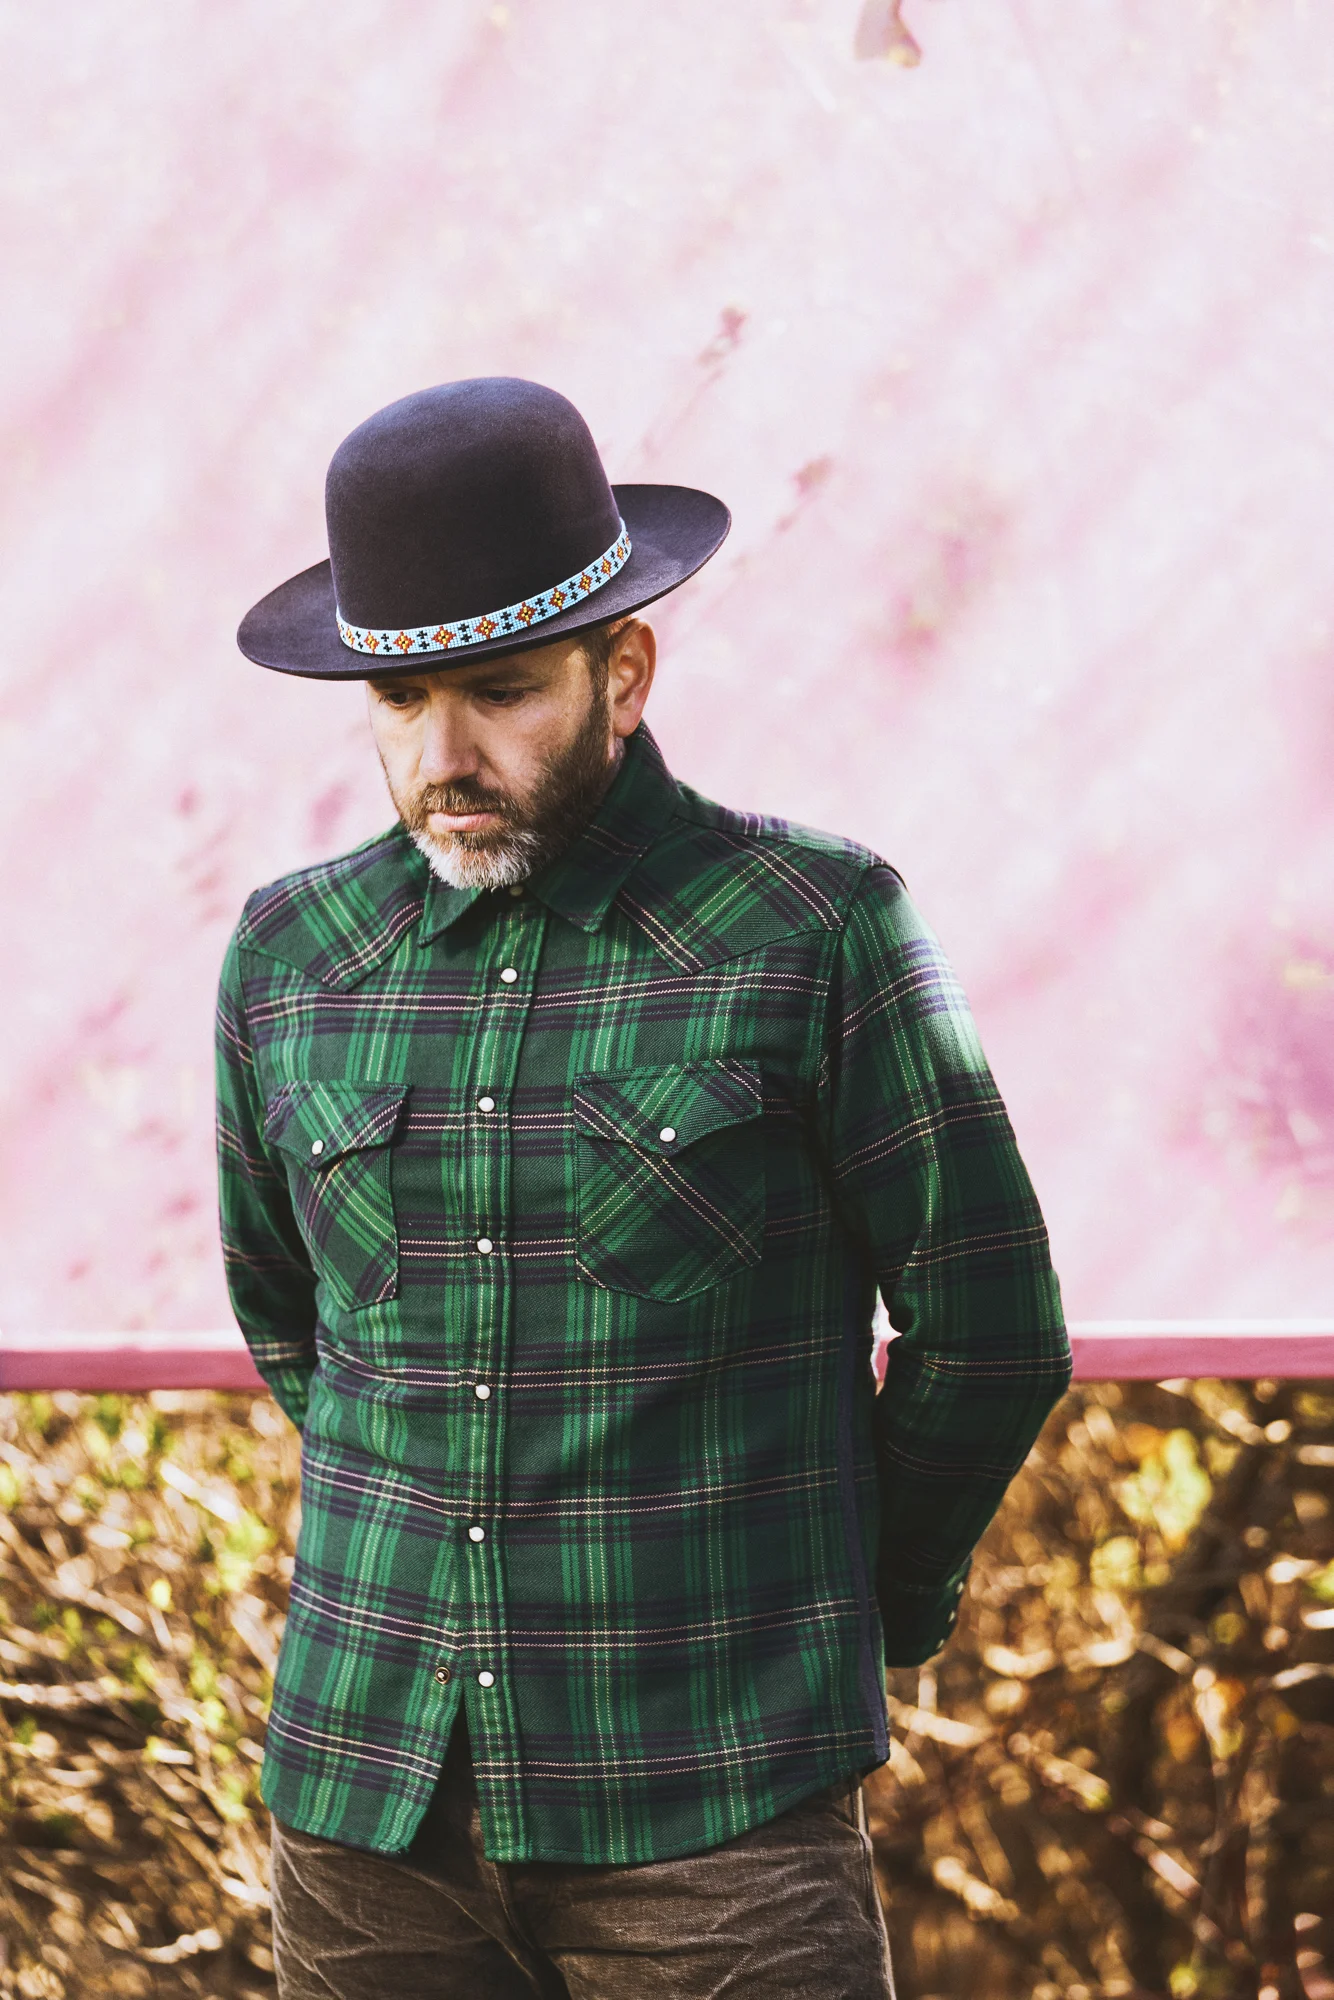 CITY AND COLOUR RETURNS TO AUSTRALIA FOR HEADLINE DATES IN FEBRUARY 2023